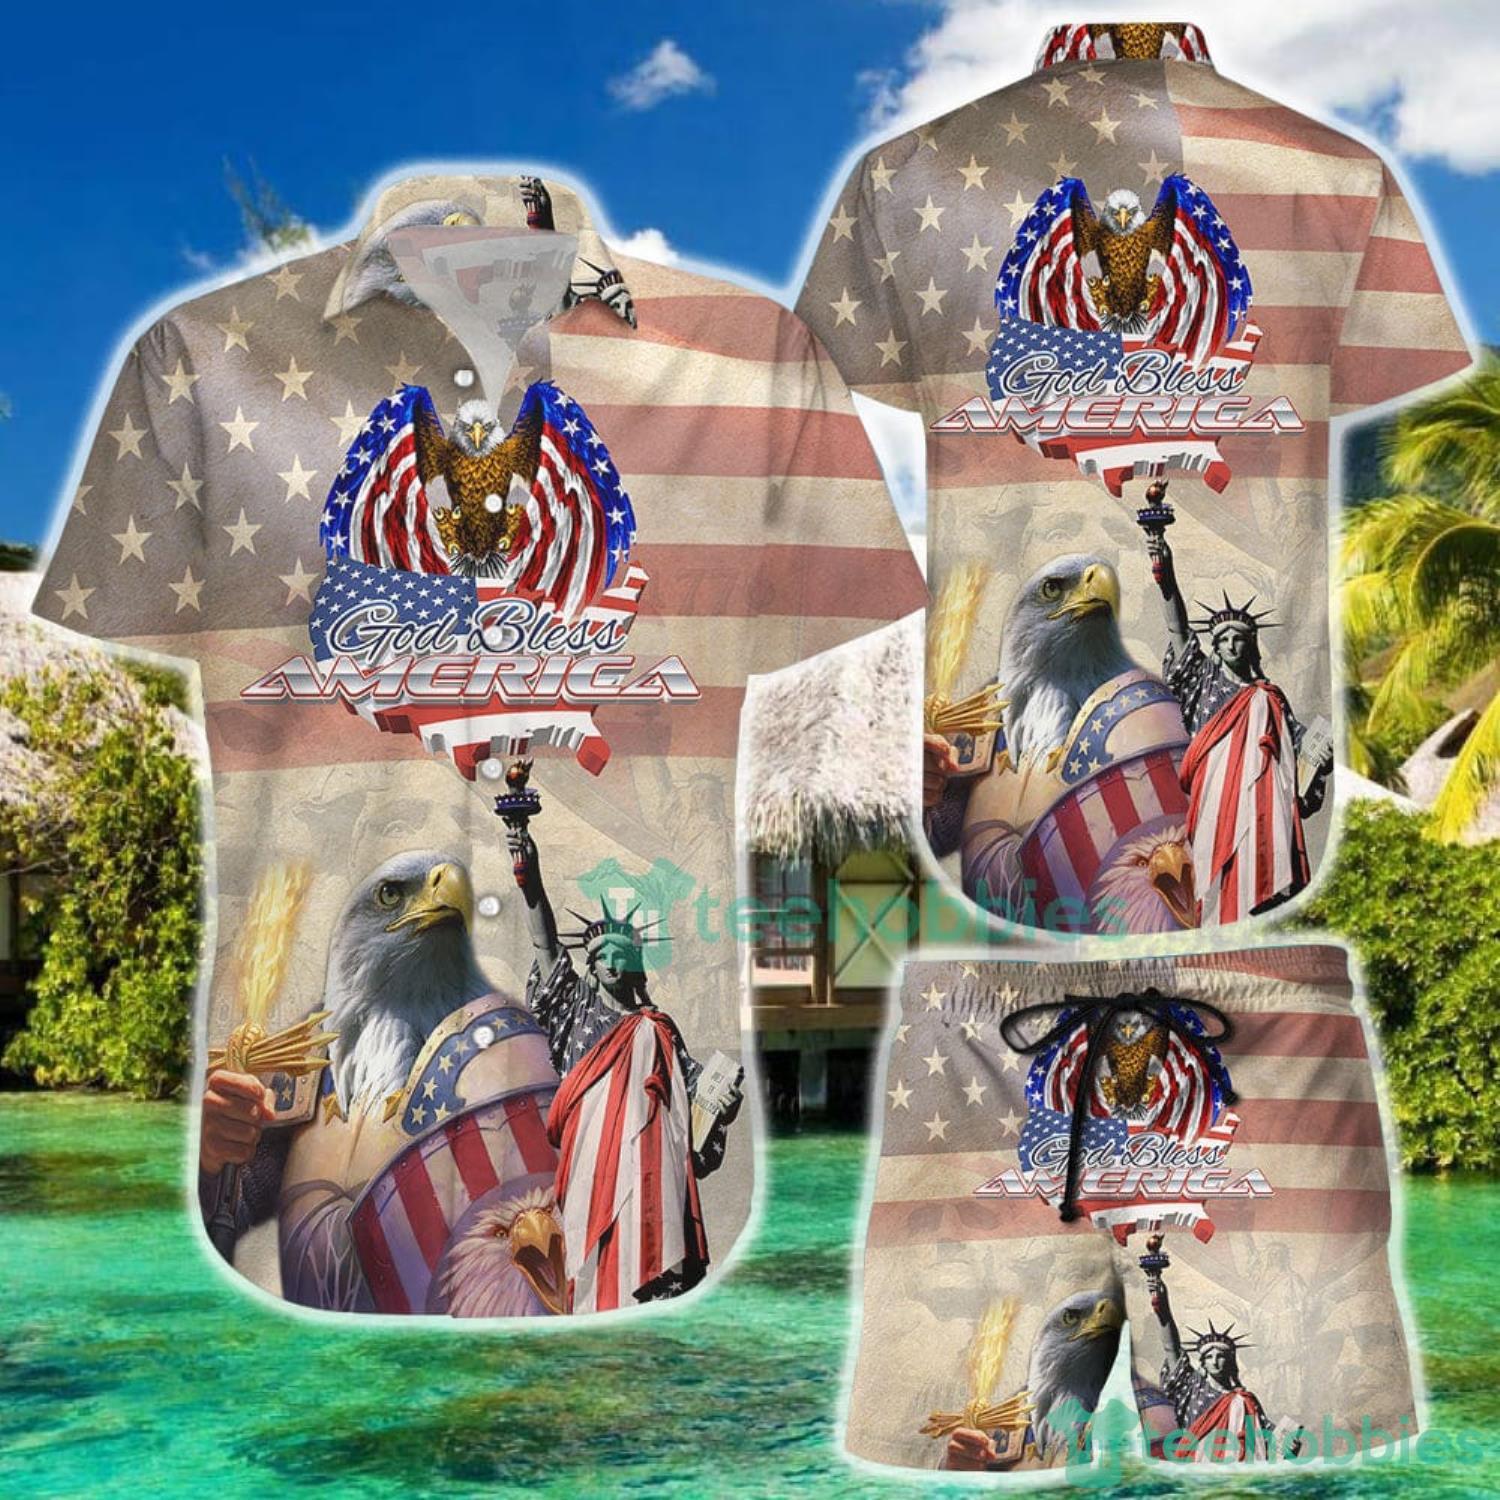 Seattle Mariners MLB Hawaiian Shirt 4th Of July Independence Day Ideal Gift  For Men And Women Fans